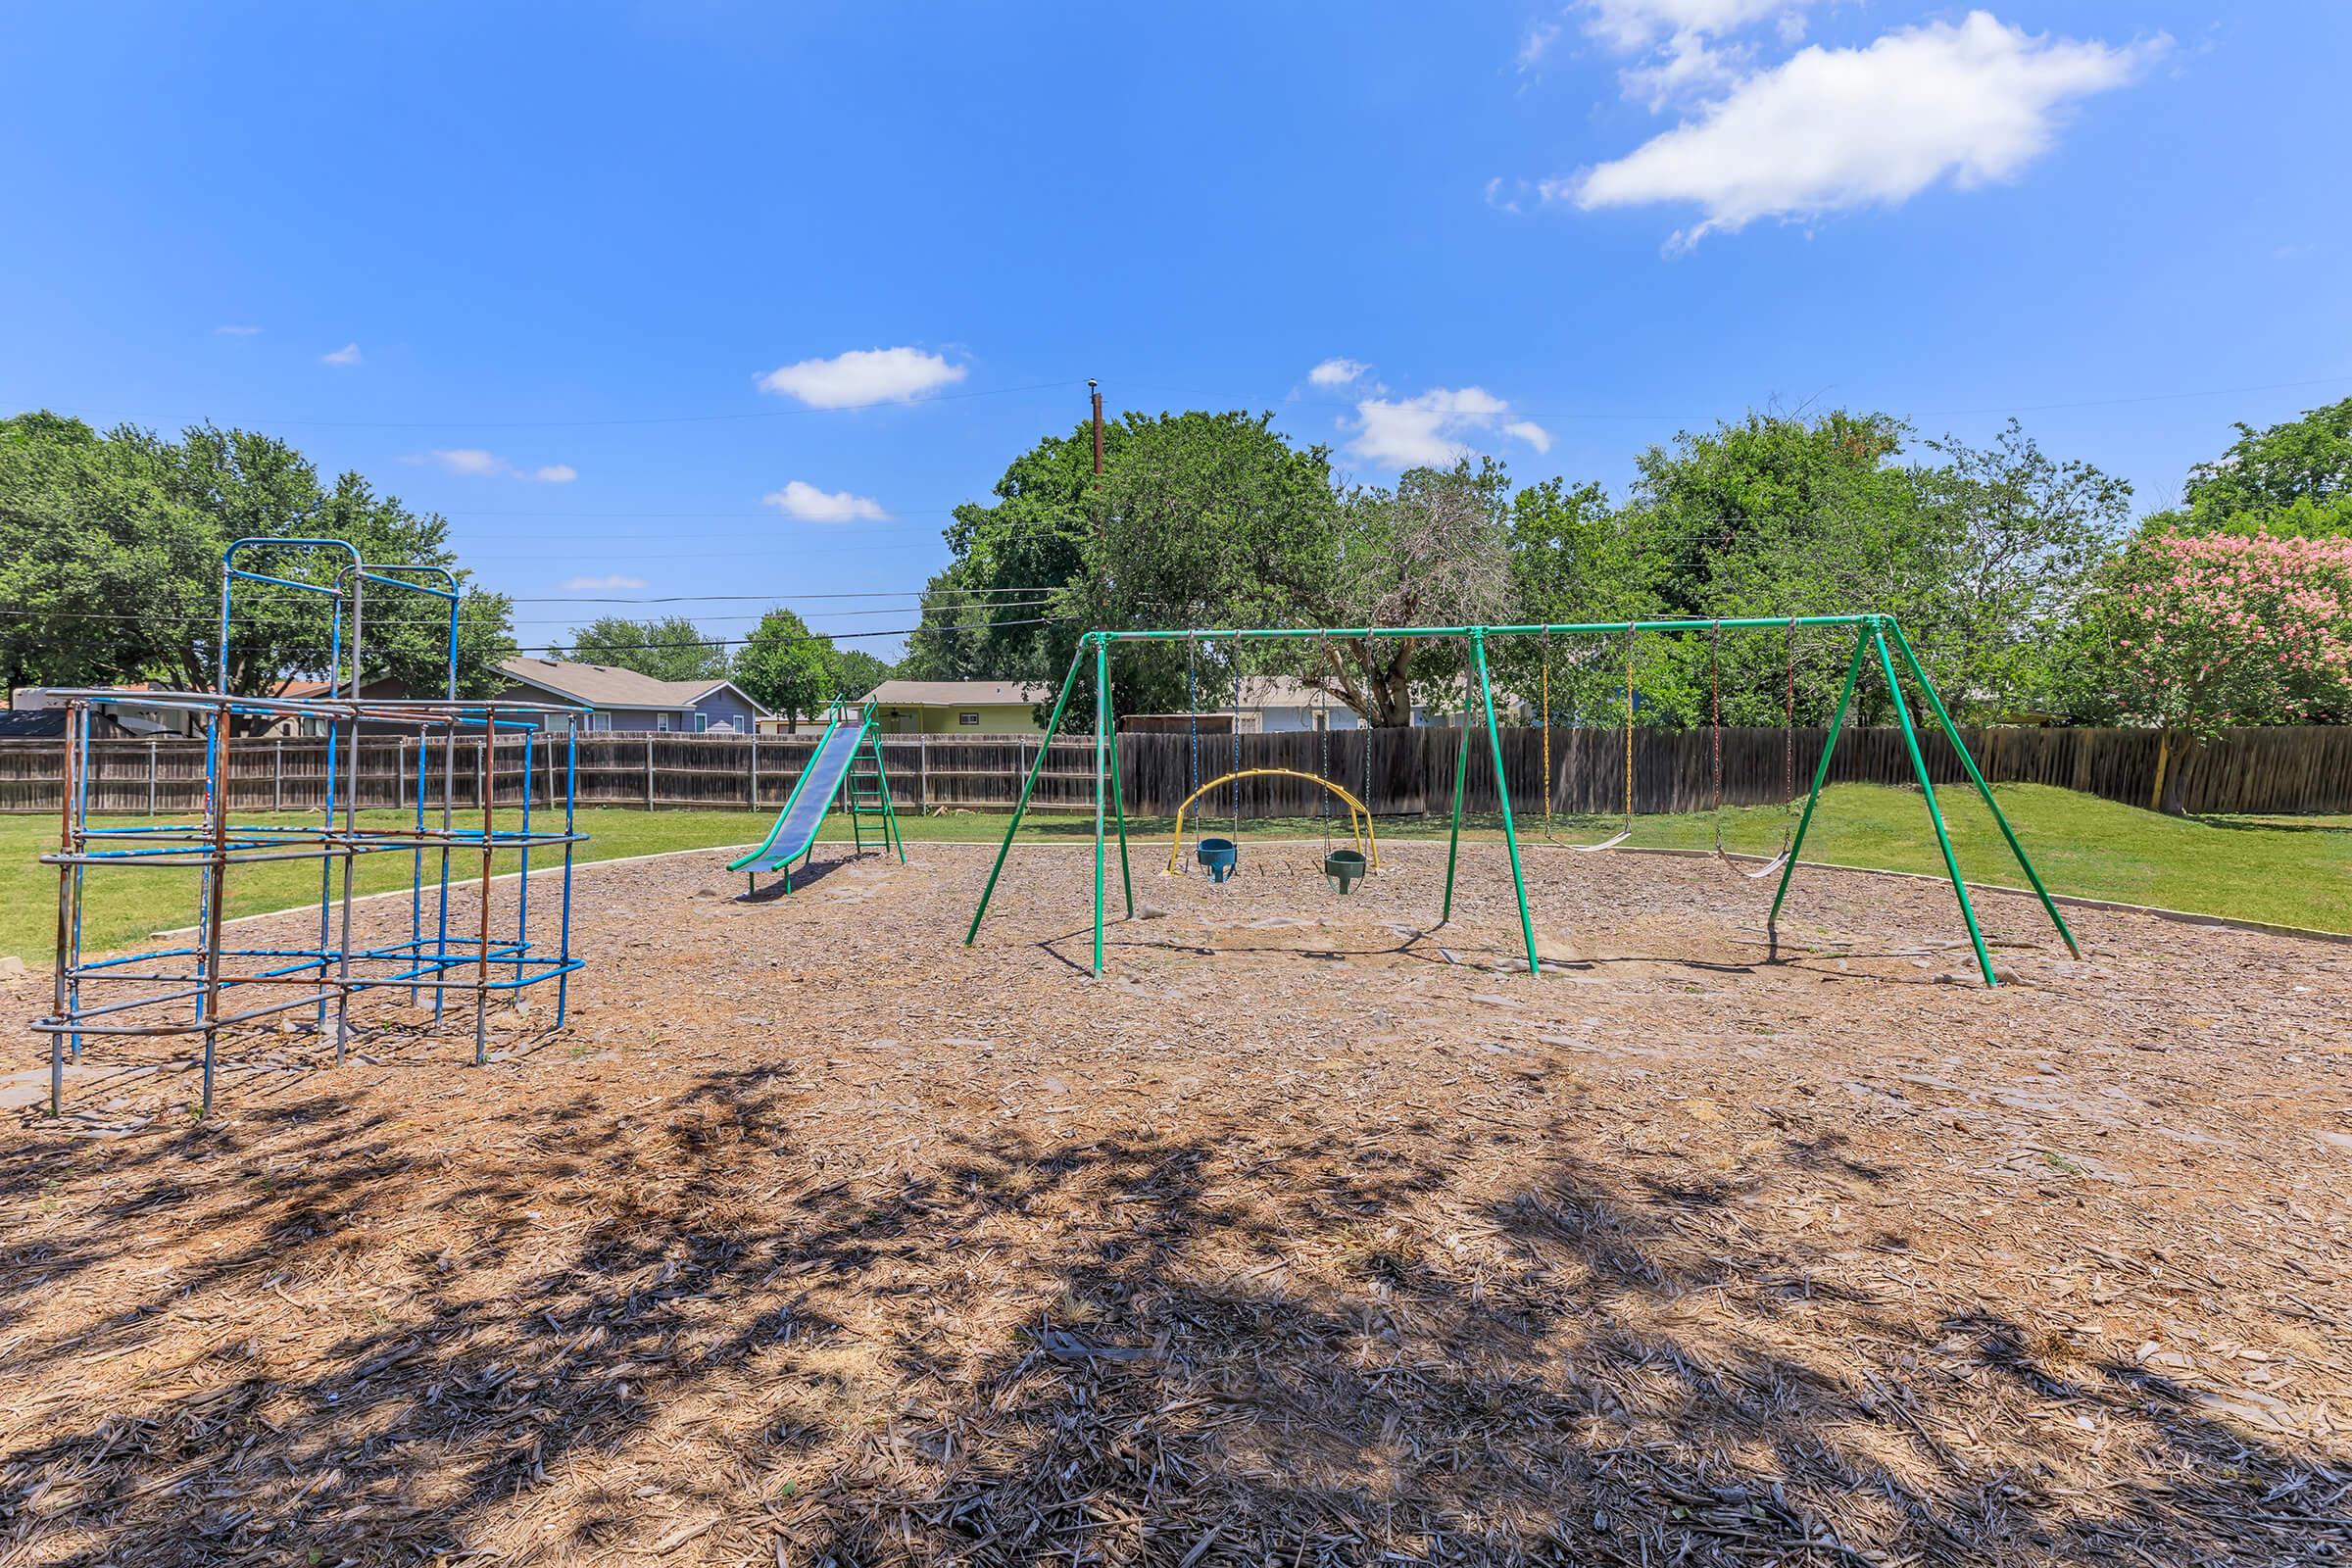 a playground in a dirt field